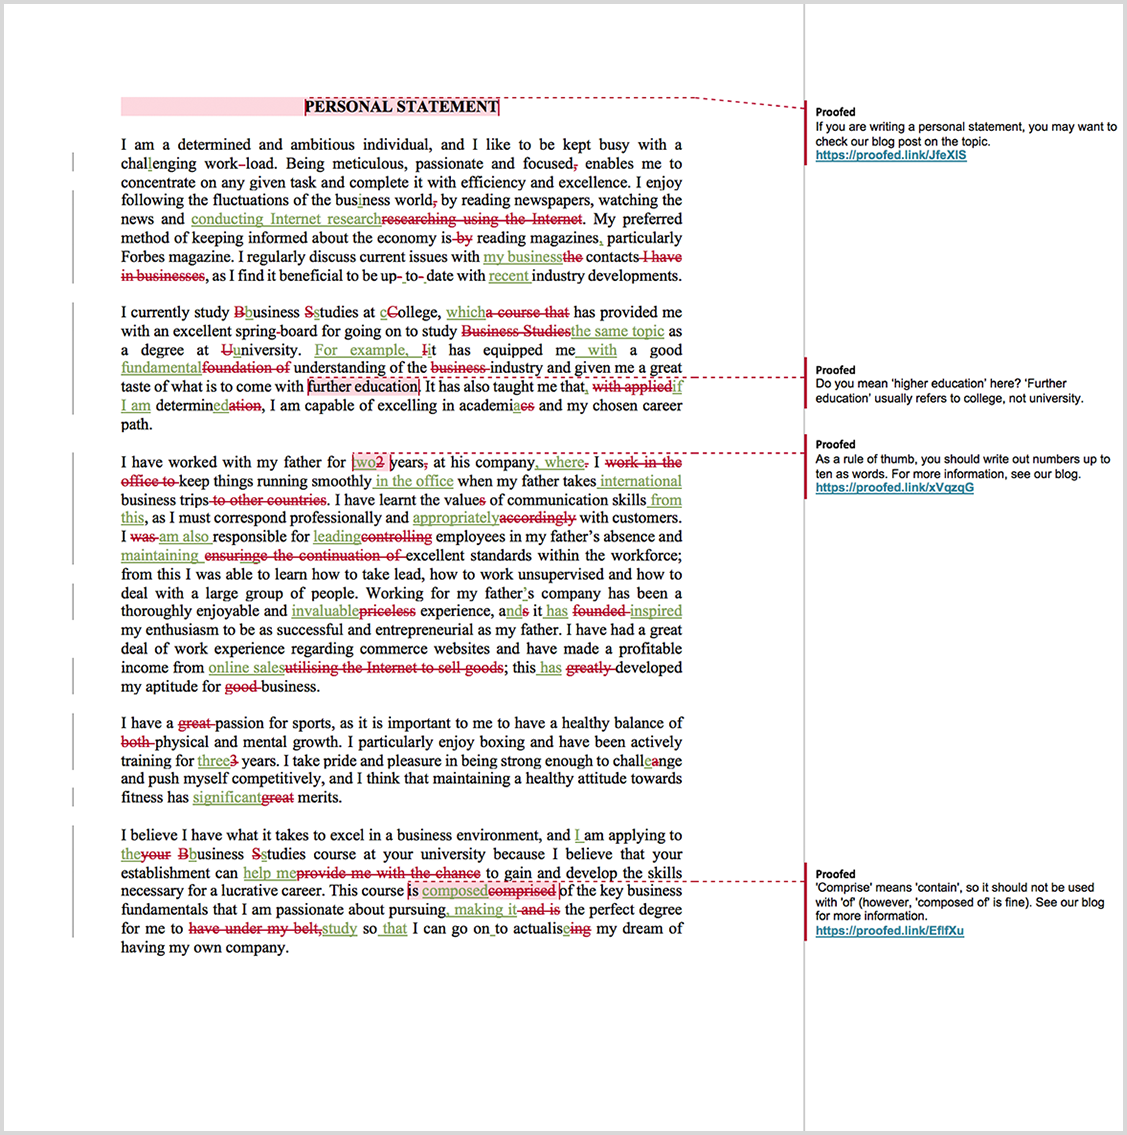 Personal Statement Proofreading Example (After Editing)